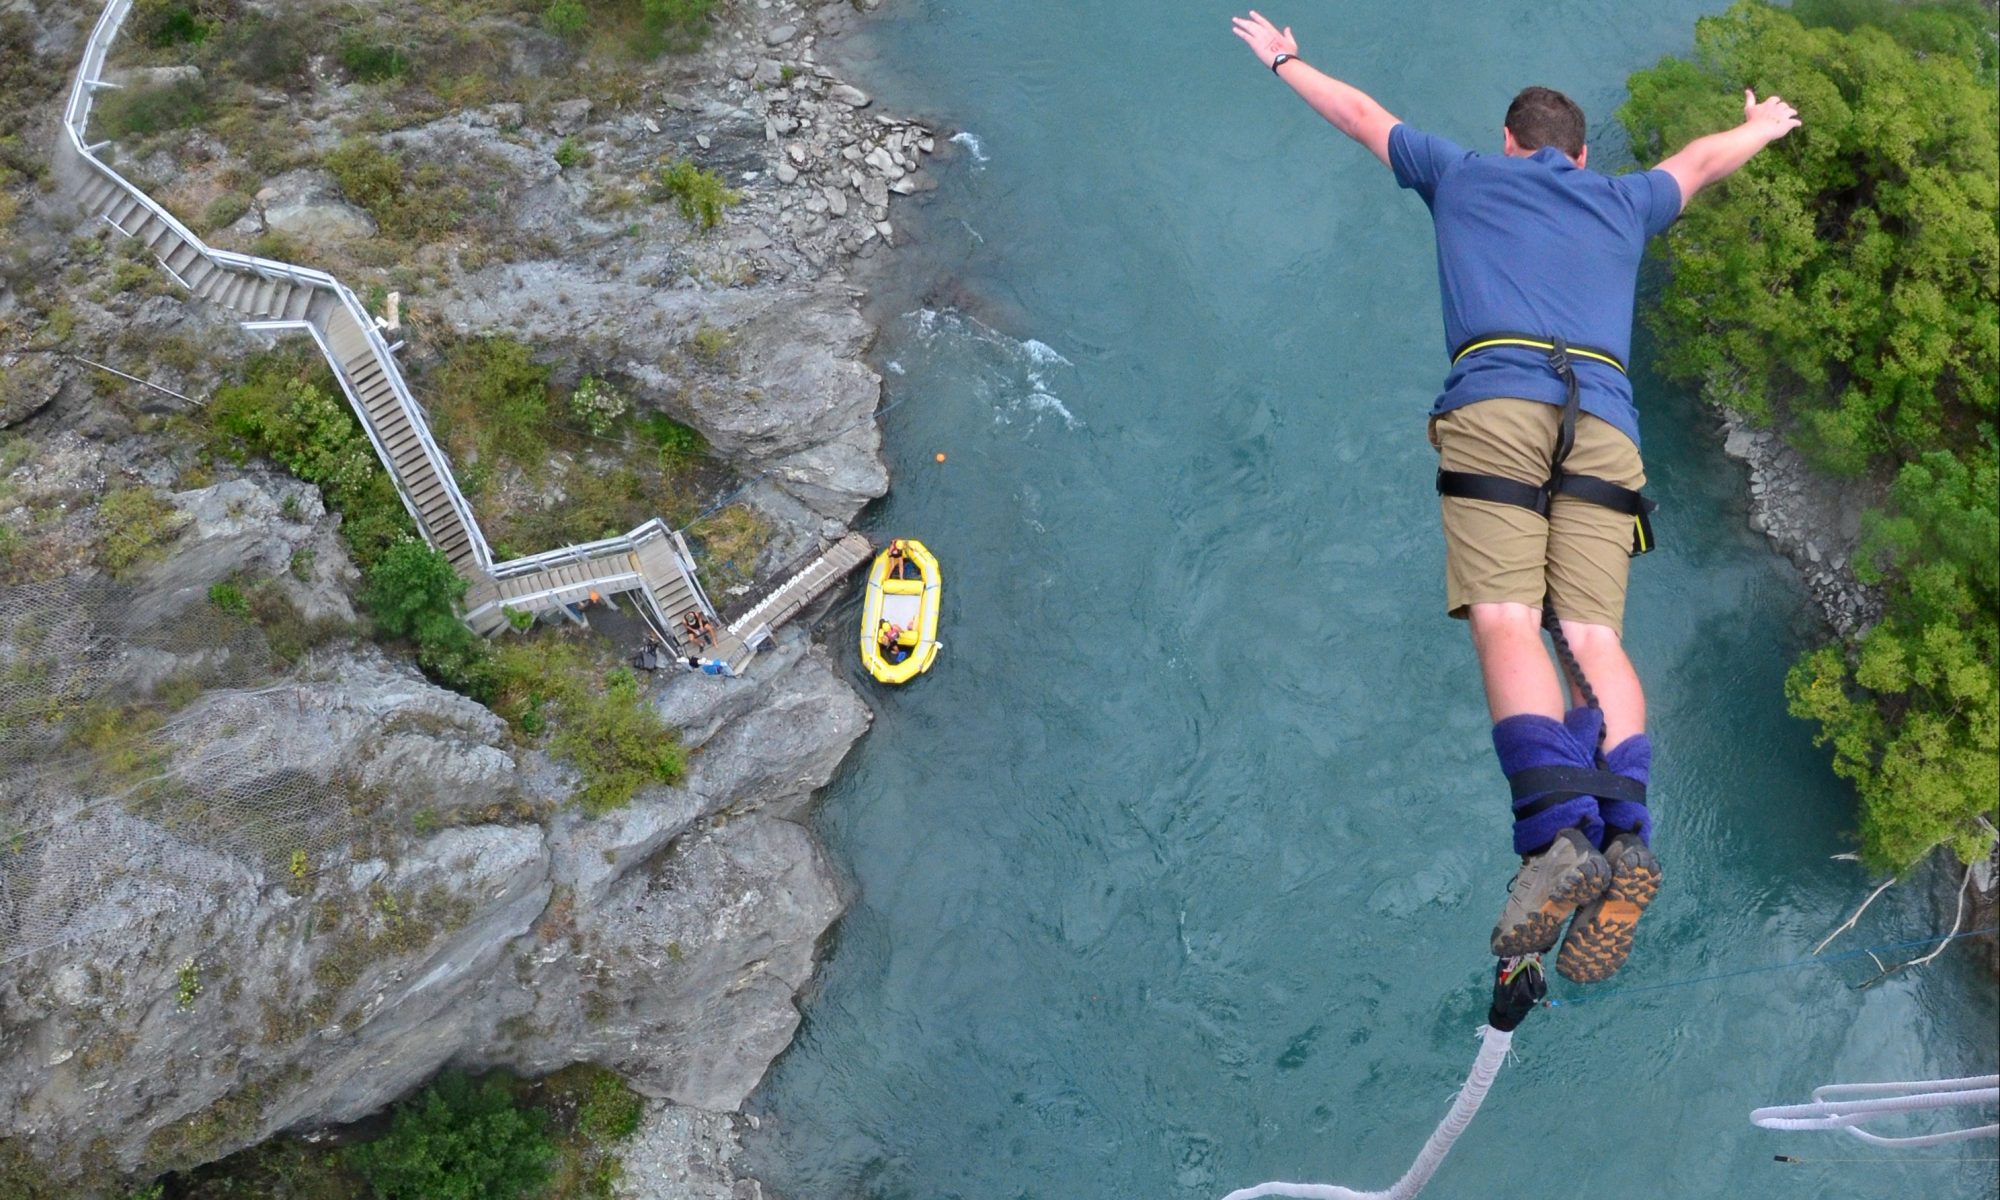 Team Member Chase Bungee Jumping in New Zealand